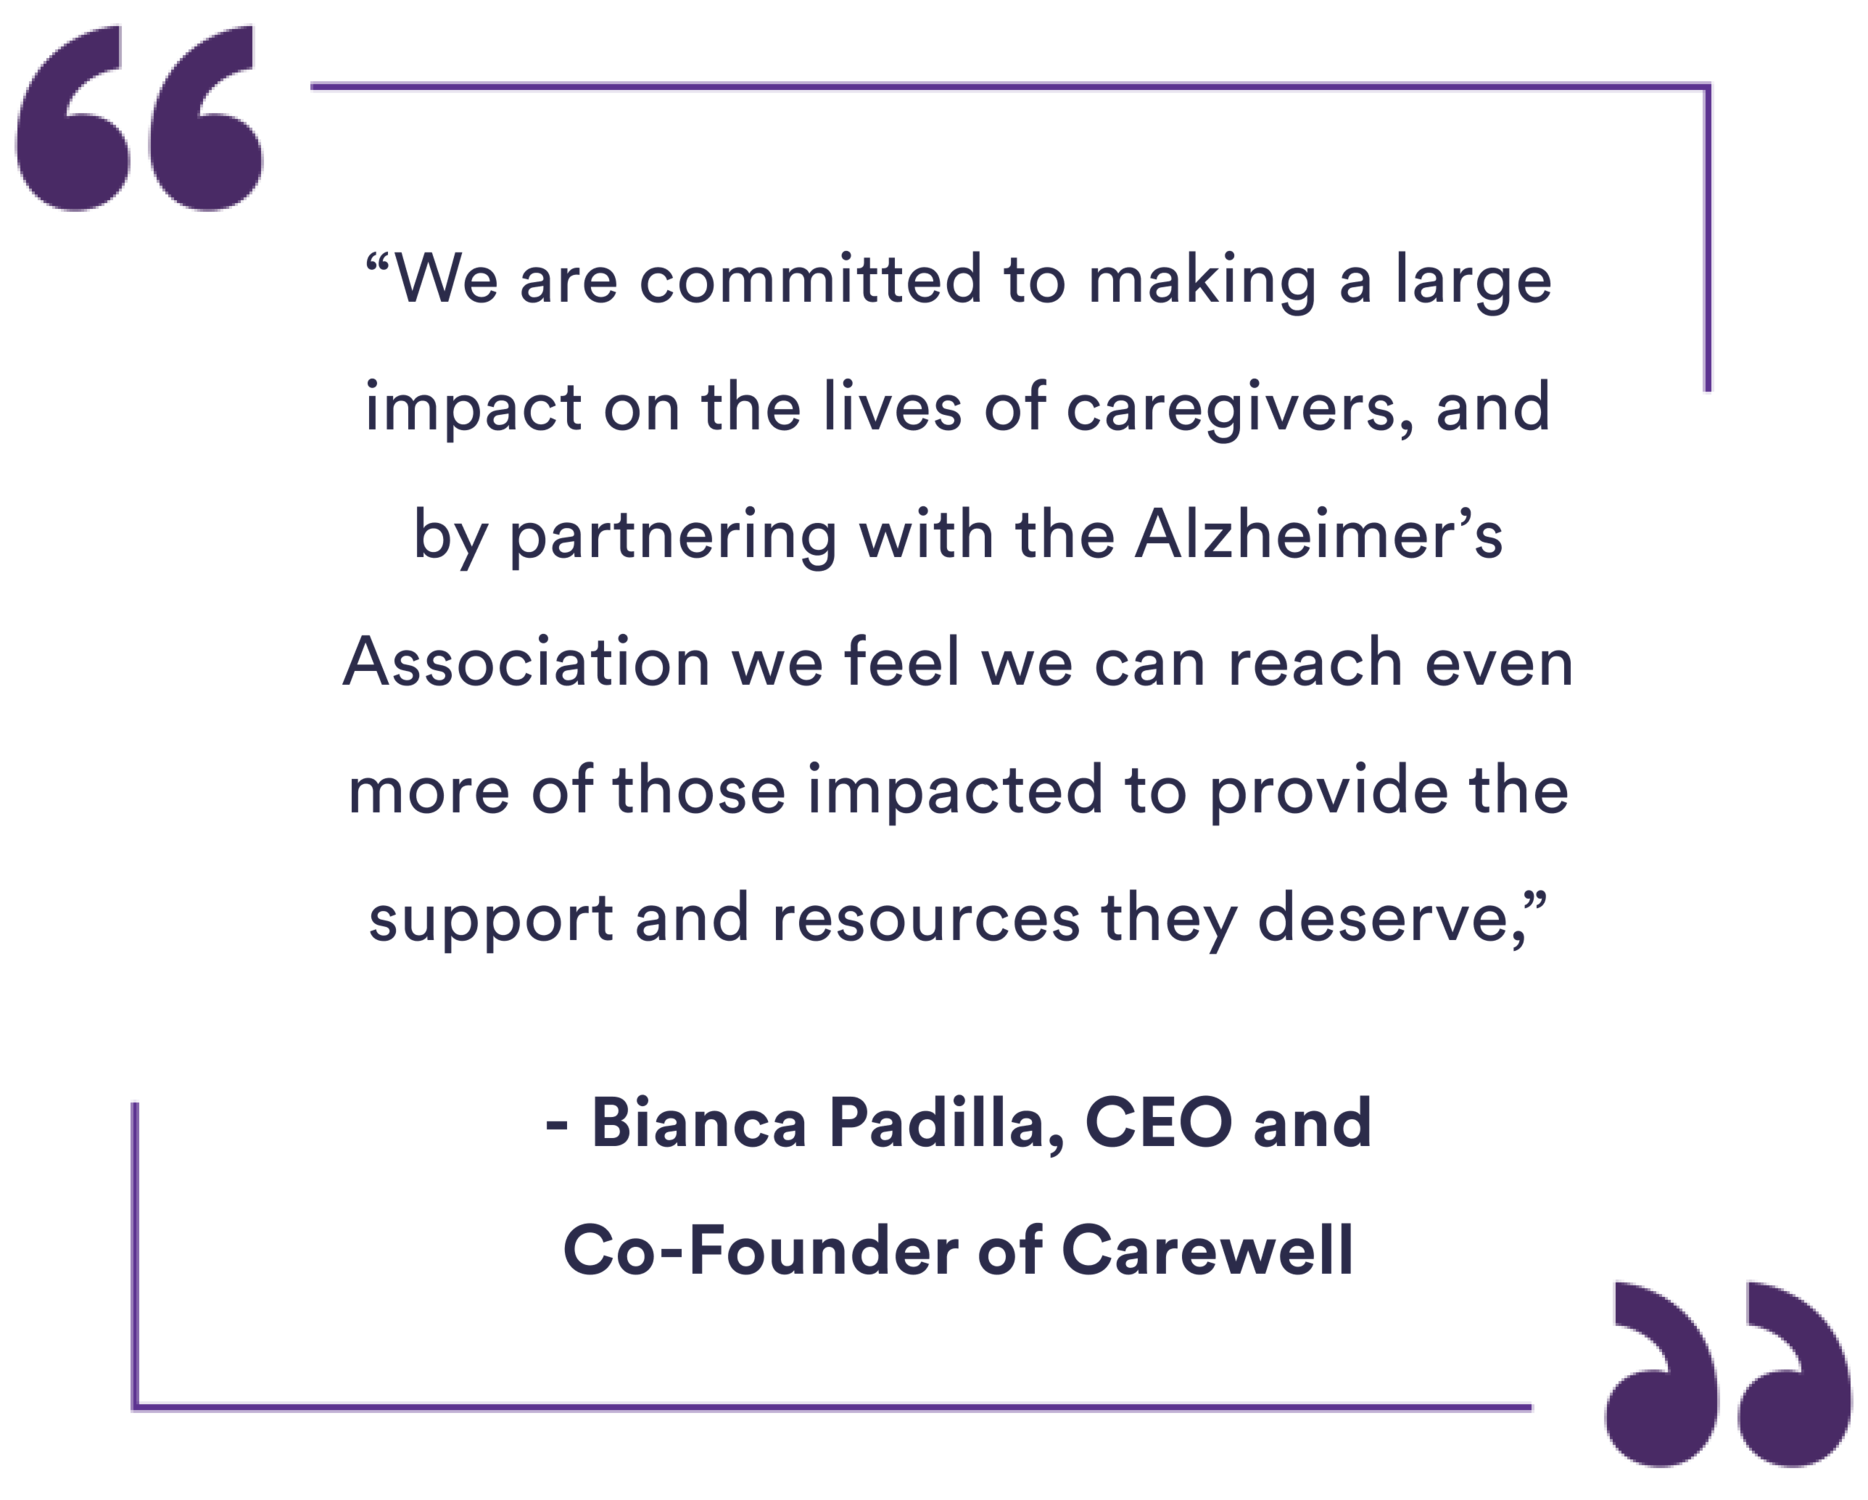 "We are committed to making a large impact on the lives of caregivers, and by partnering with the Alzheimer;'s Association we feel we can reach even more of those impacted to provide the support and resources they desserve" - Bianca Padilla, CEO and Co-Founder of Carewll